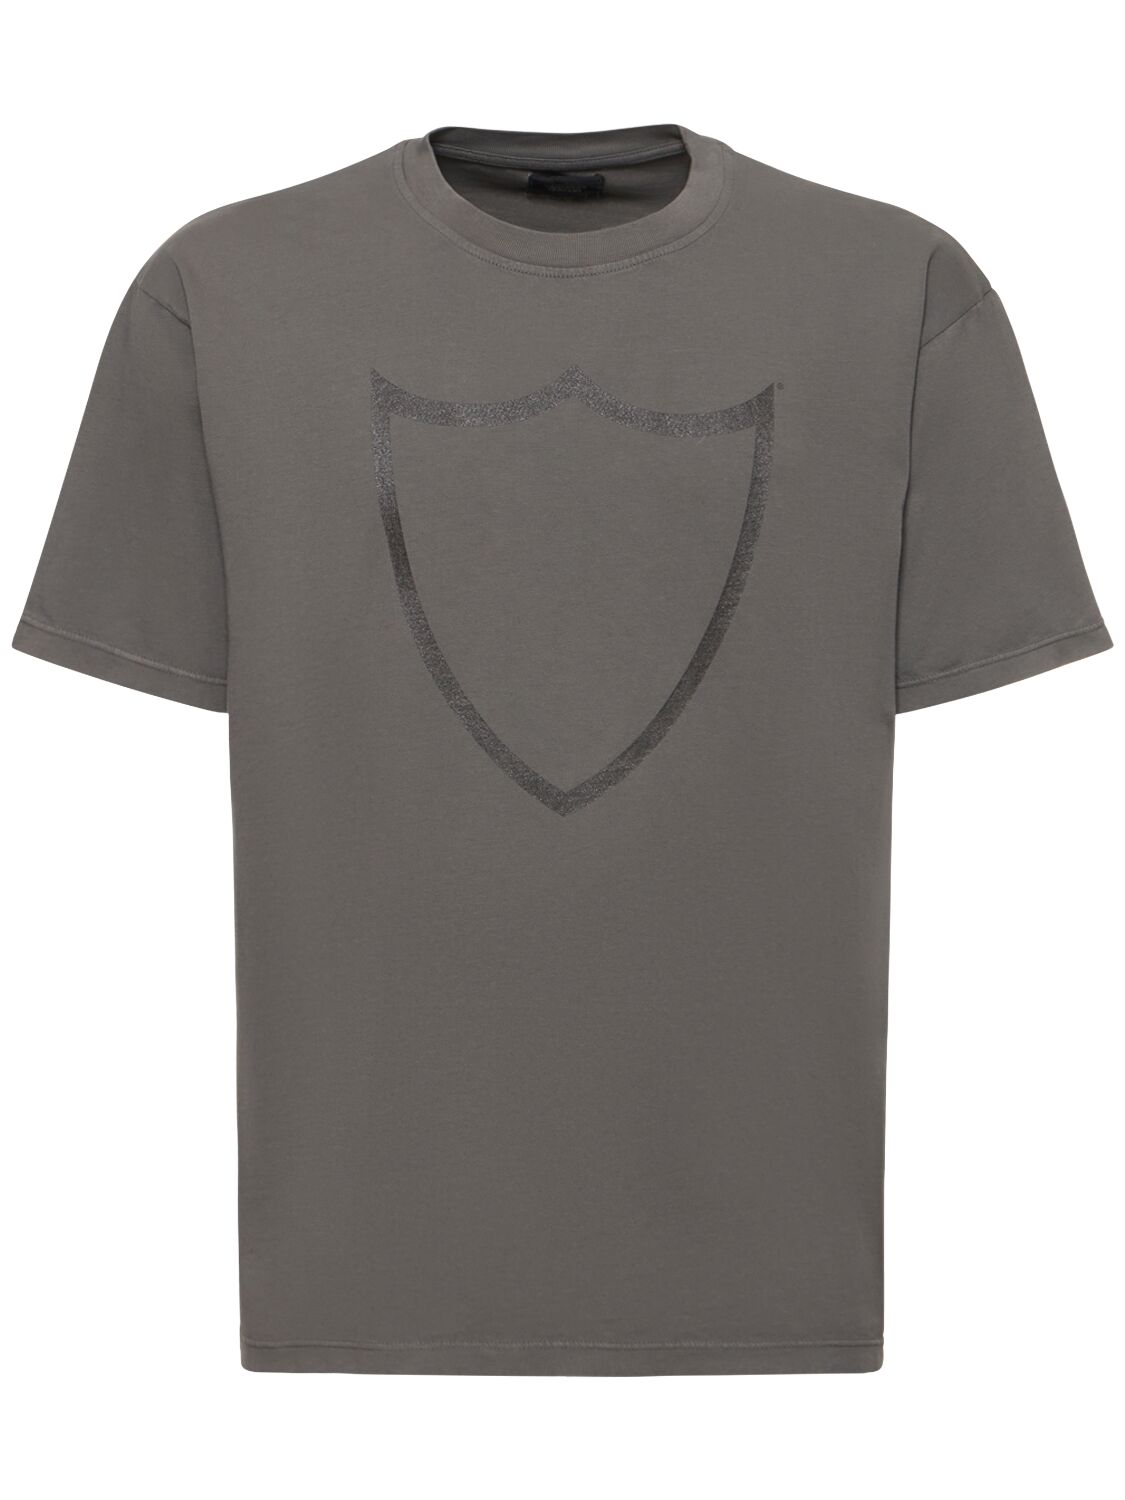 Htc Los Angeles Logo Print Cotton Jersey T-shirt In Grey